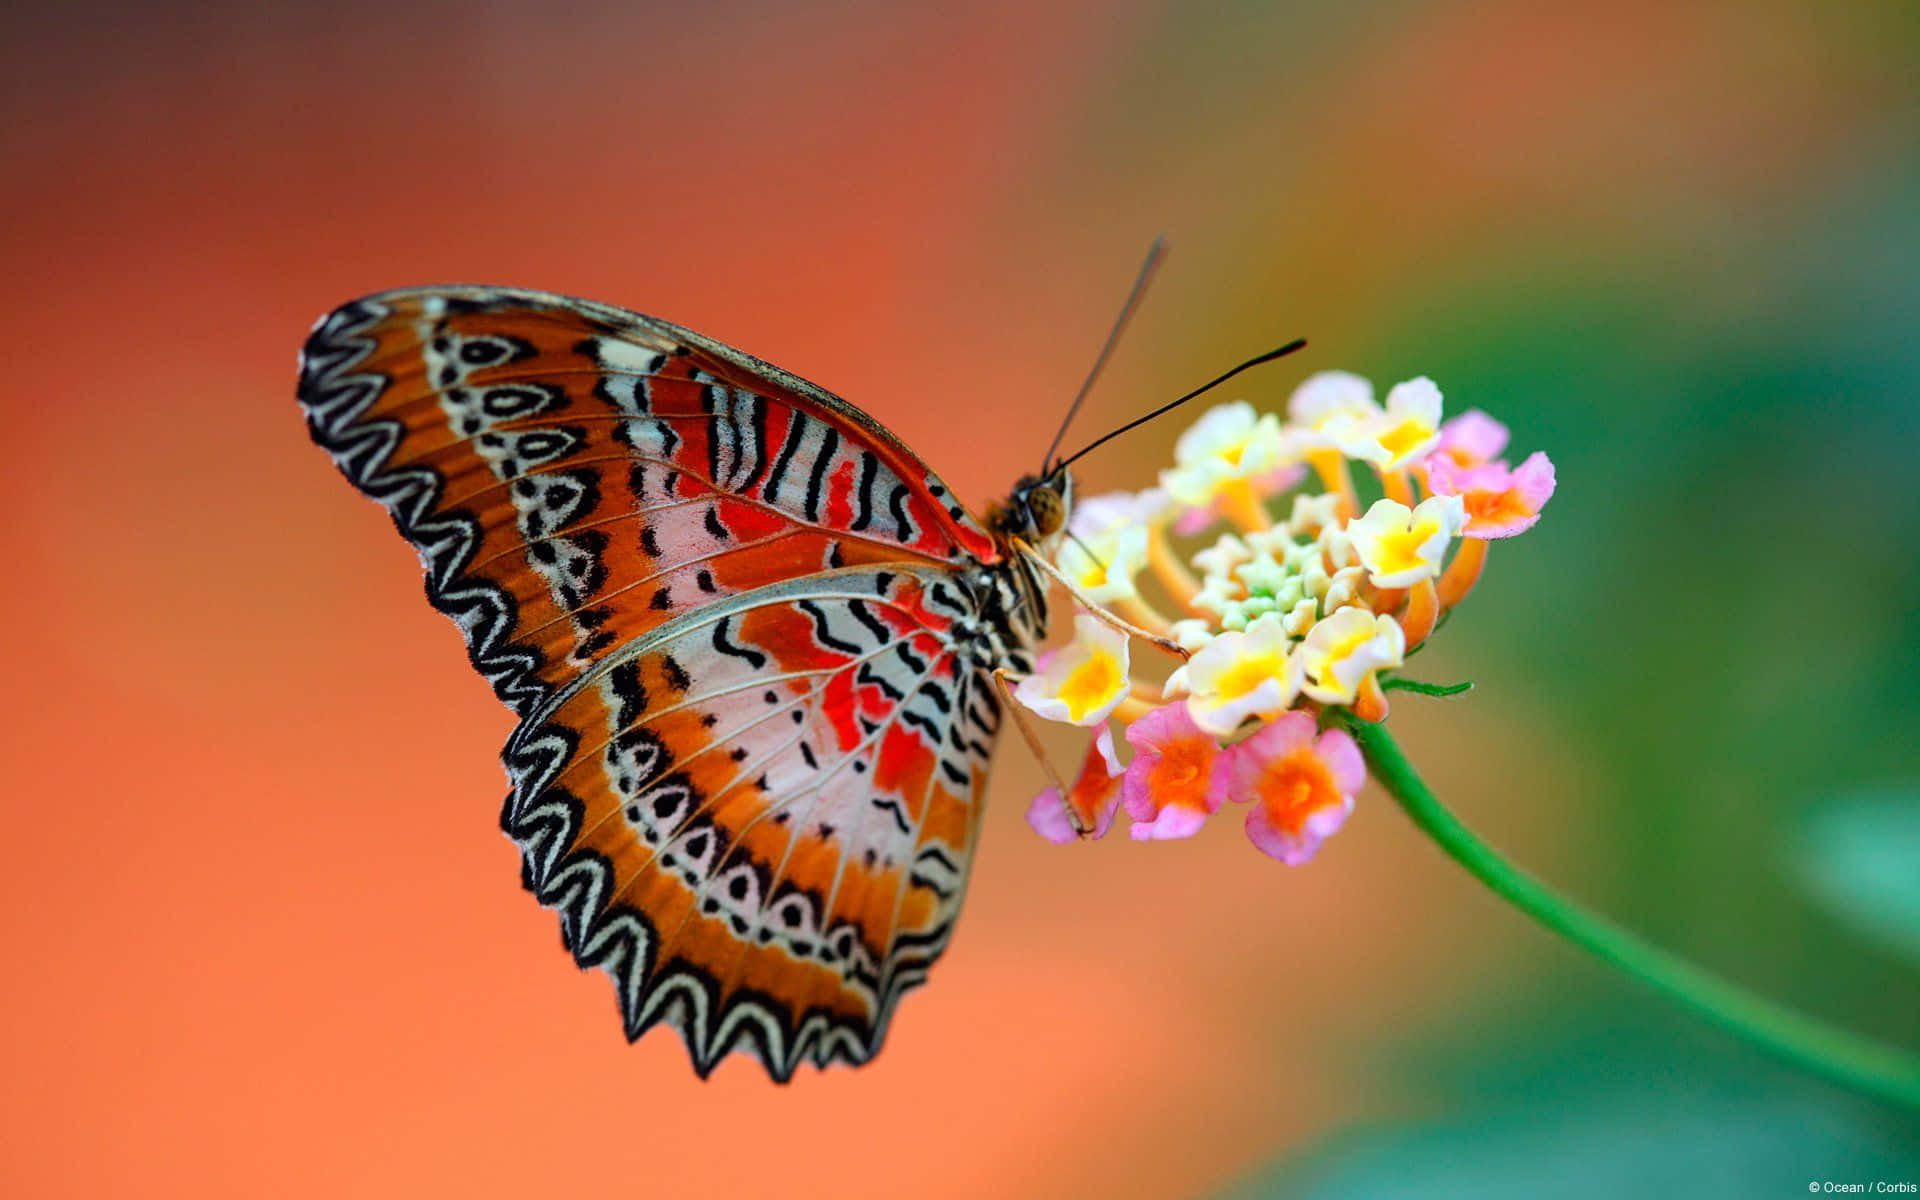 A beautiful butterfly with vibrant colors.